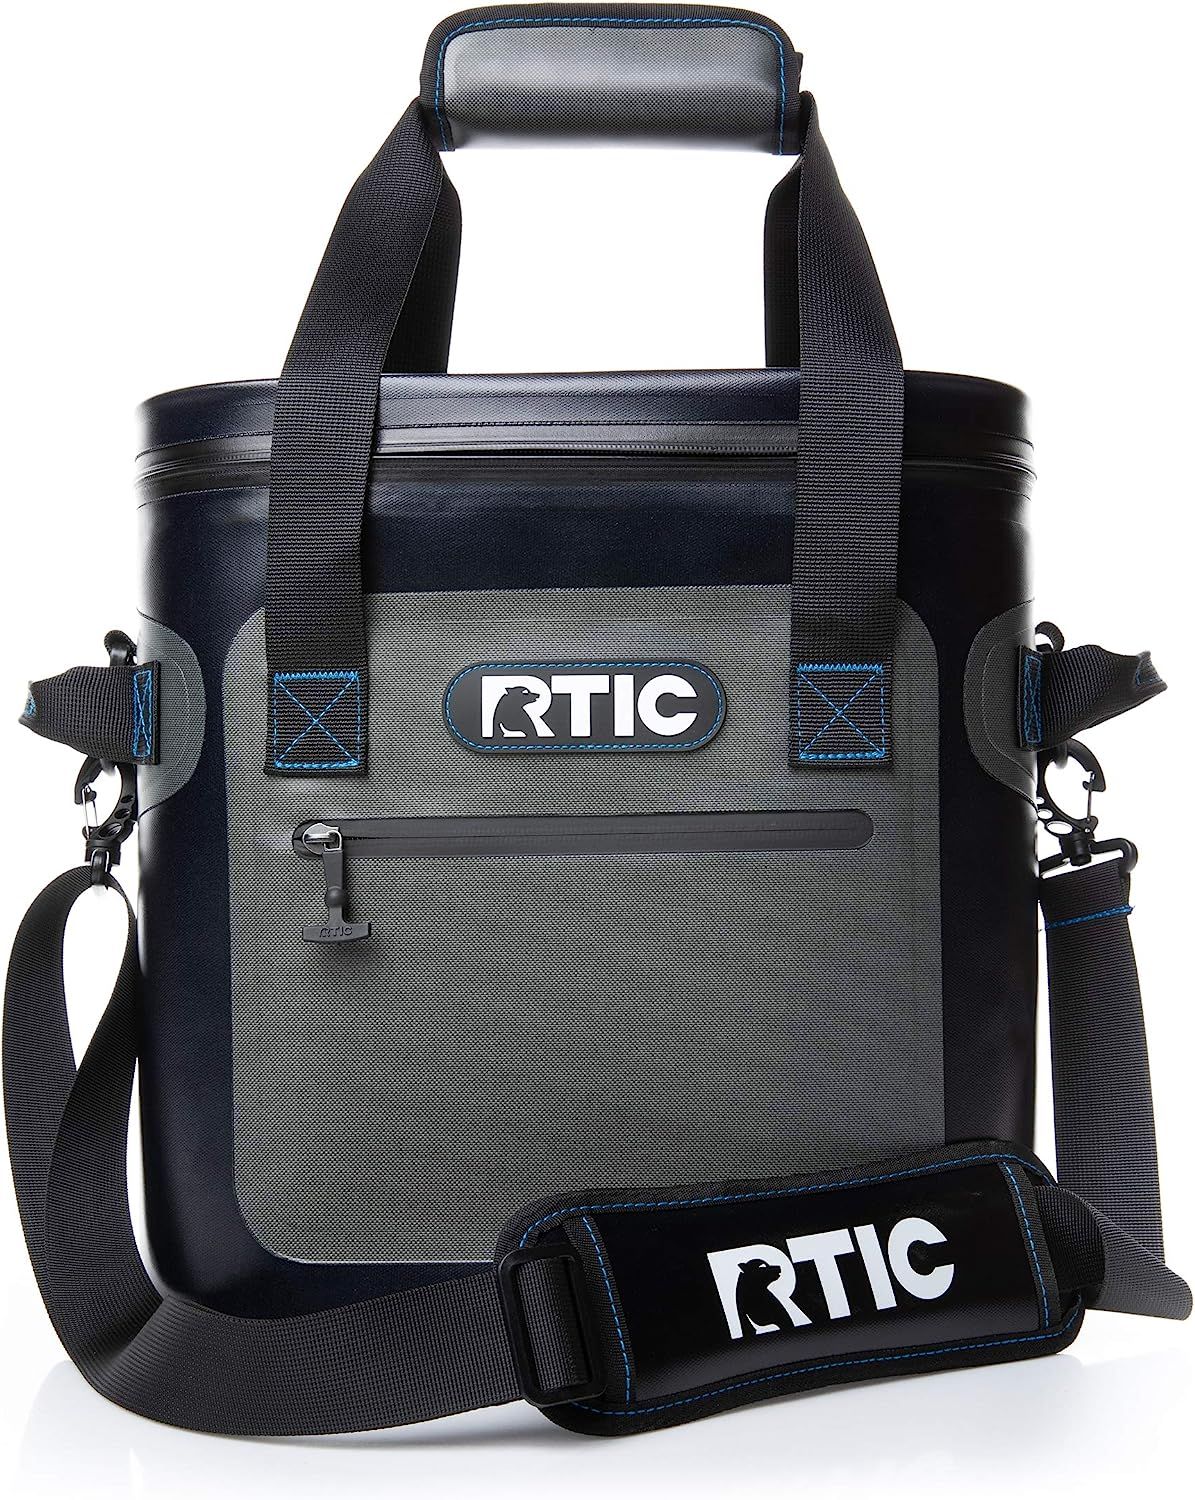 RTIC Soft Cooler 20, Grey, Insulated Bag, Leak Proof Zipper, Keeps Ice Cold for Days | Amazon (US)